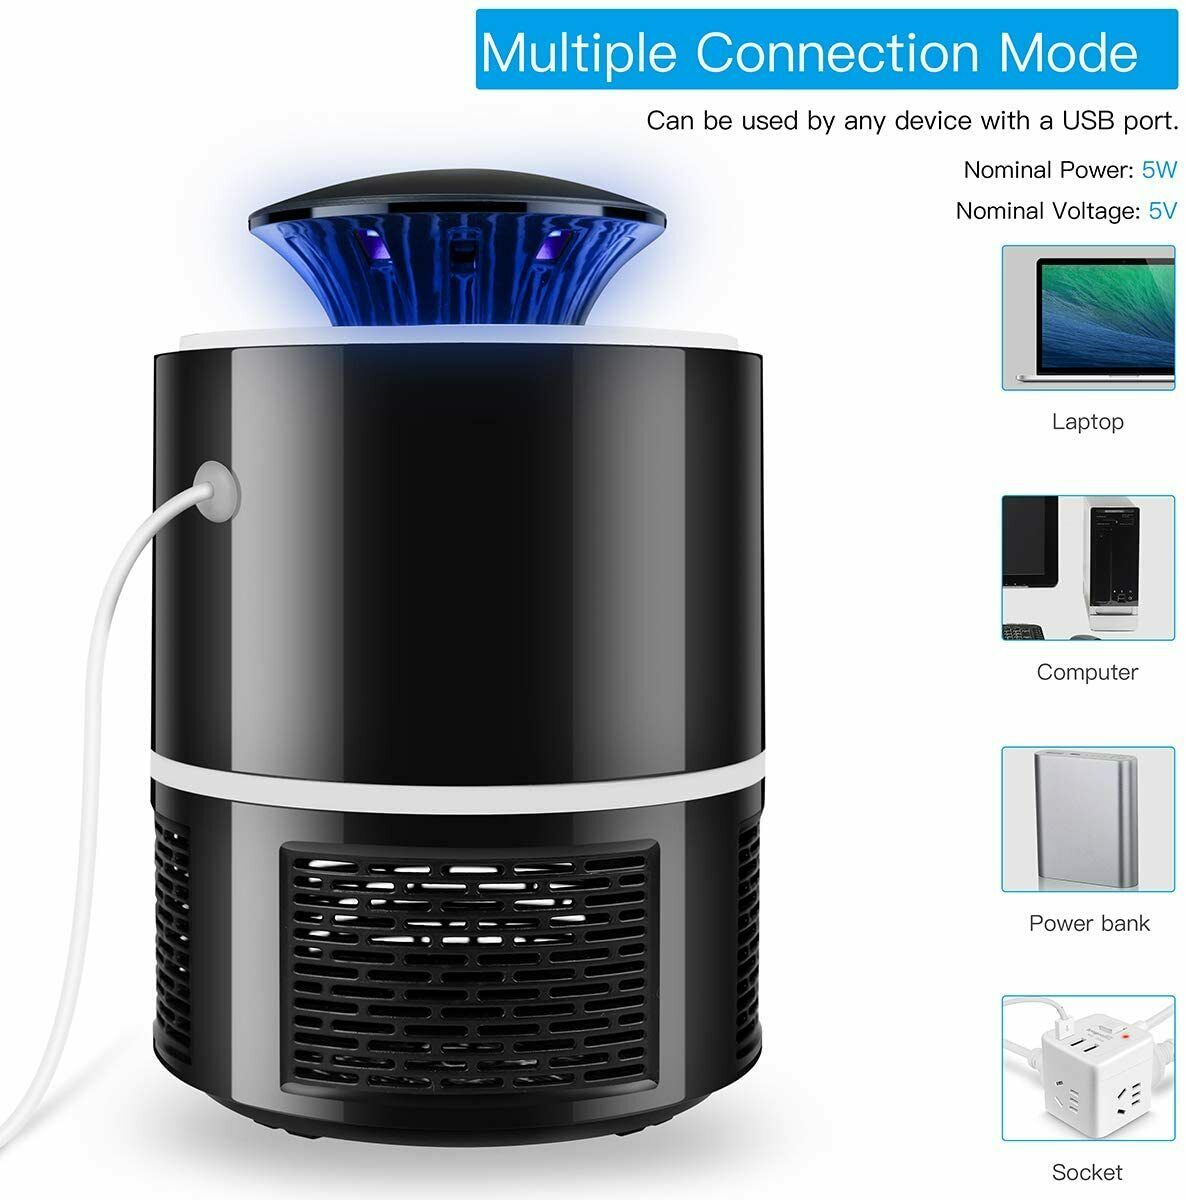 Electric UV Mosquito Zapper Lamp [FREE SHIPPING]